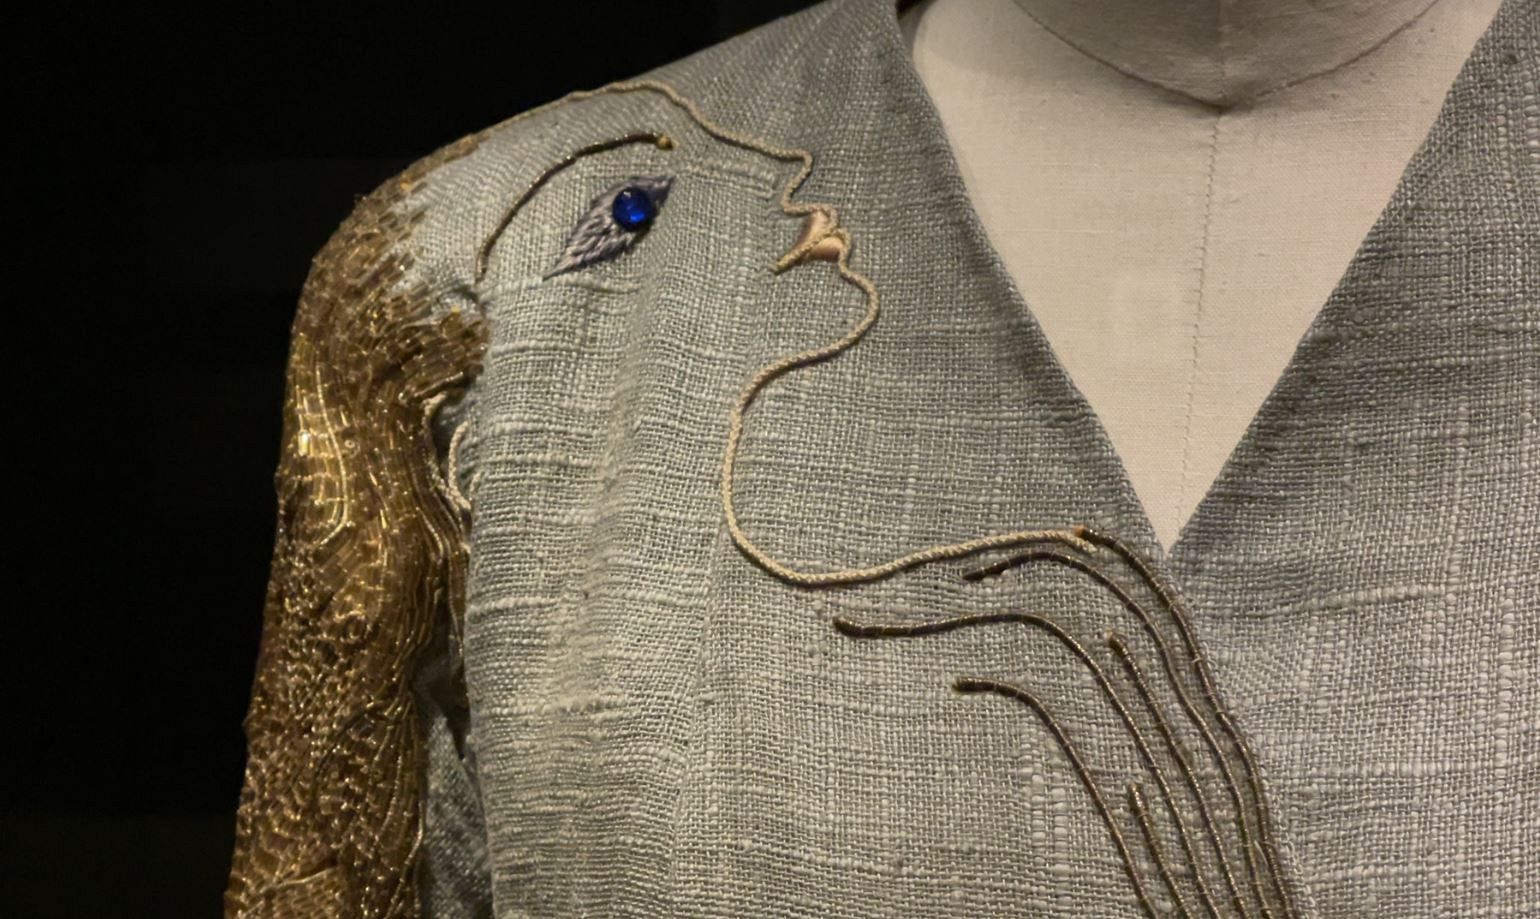 Jean Cocteau is behind the design embroidered on this outfit